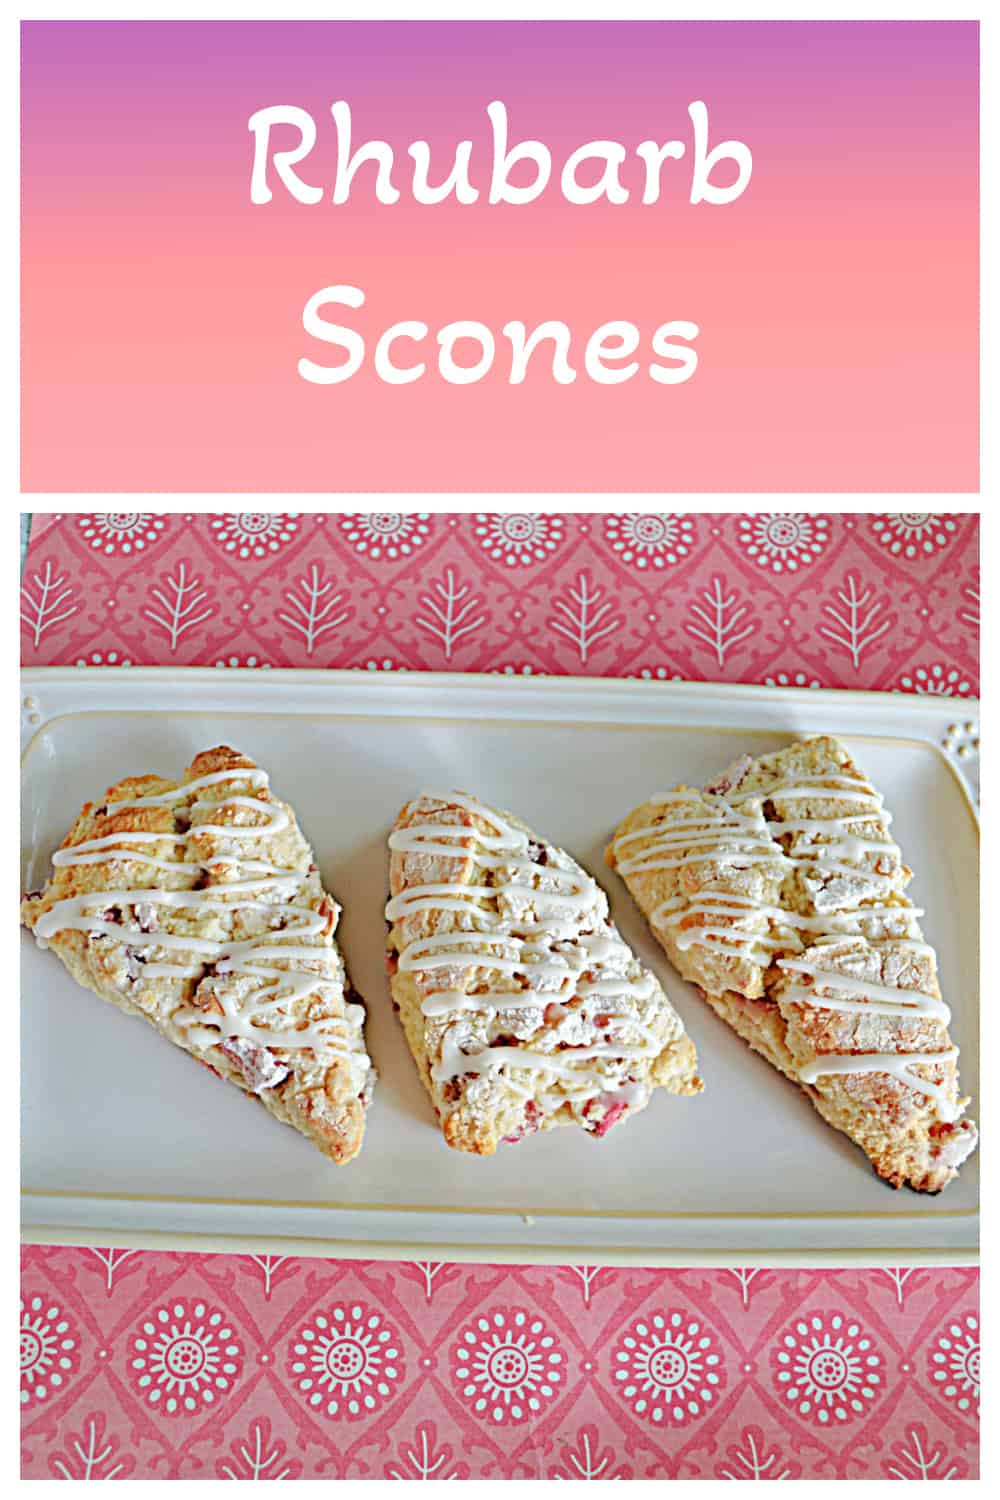 Pin Image: Text title, Three scones with a drizzle of glaze.